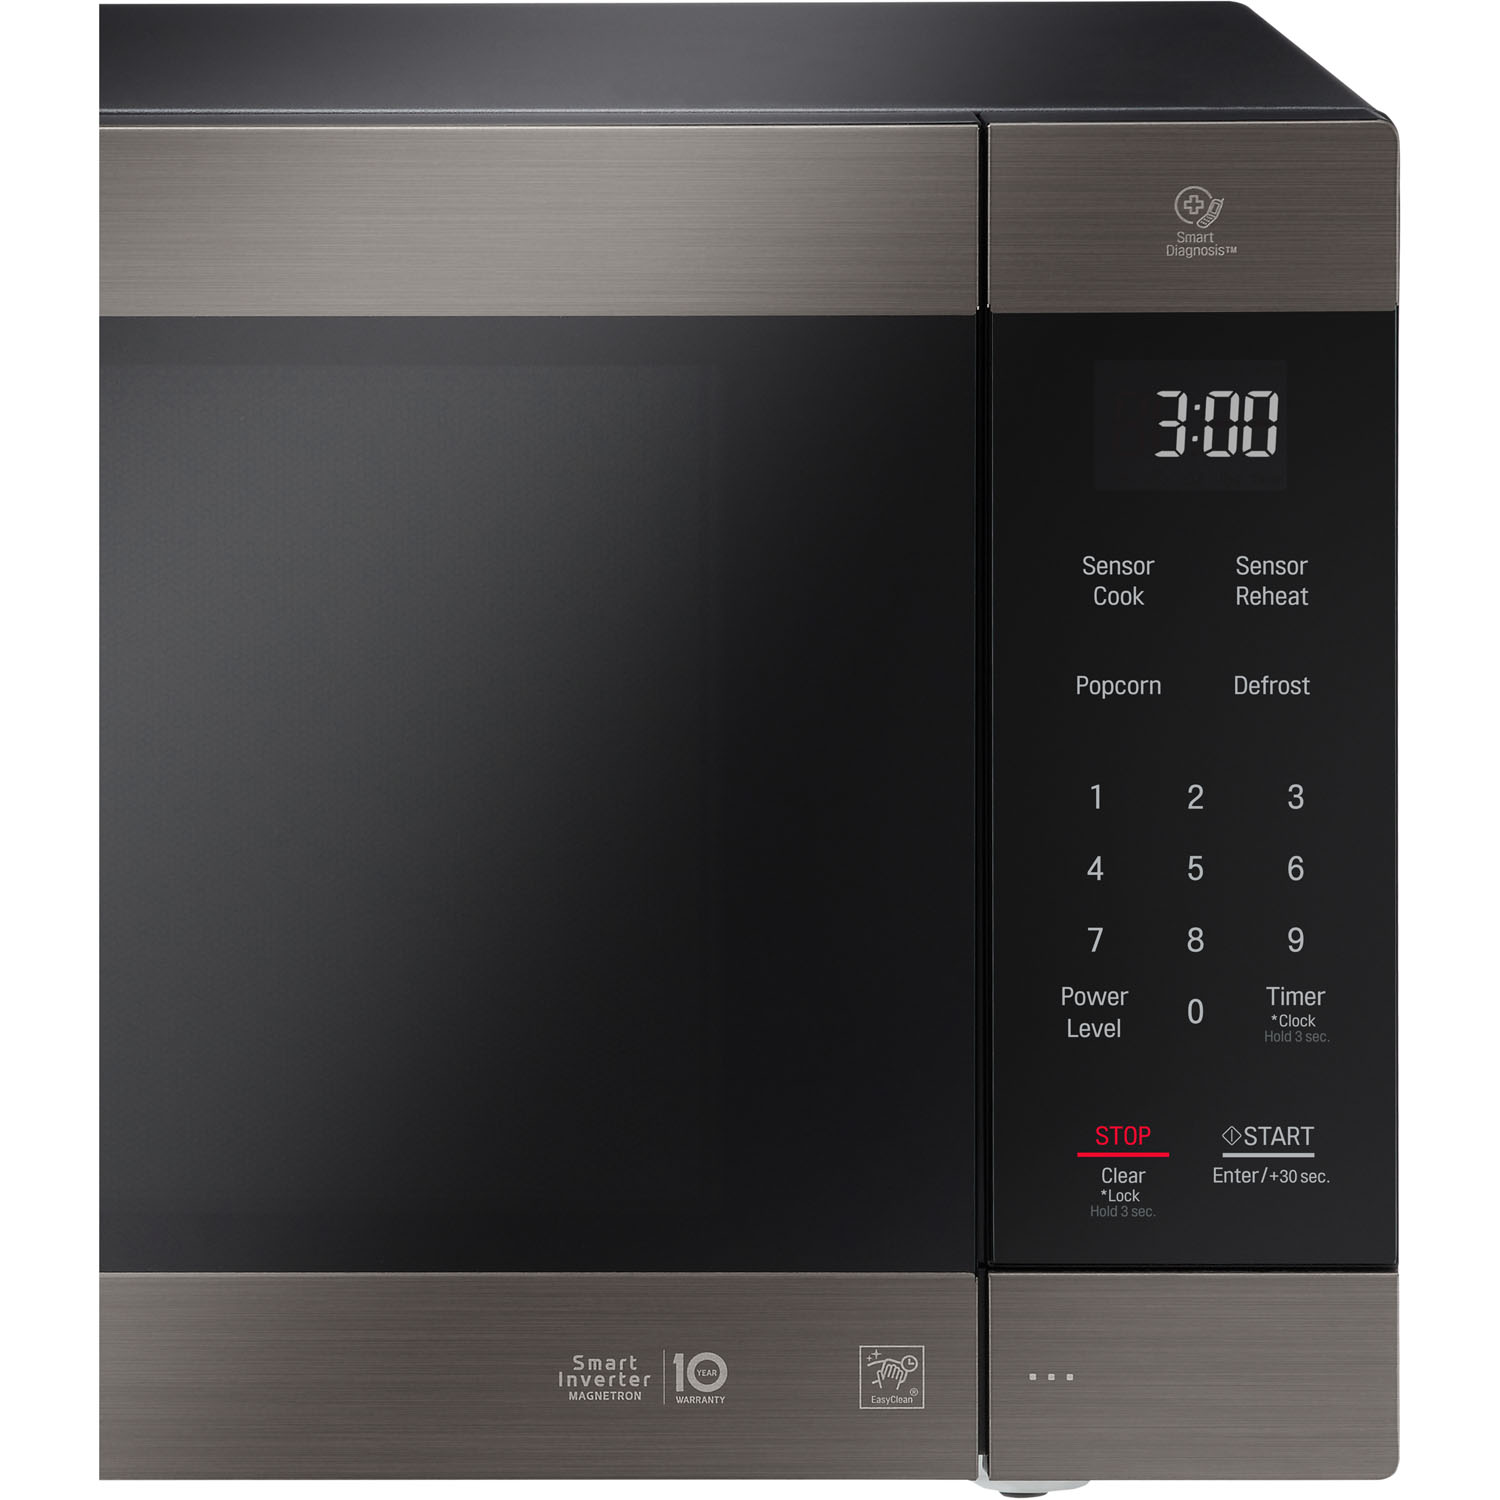 LG NeoChef 2.0 Cu. Ft. 1200W Countertop Microwave, Black Stainless Steel - image 2 of 8